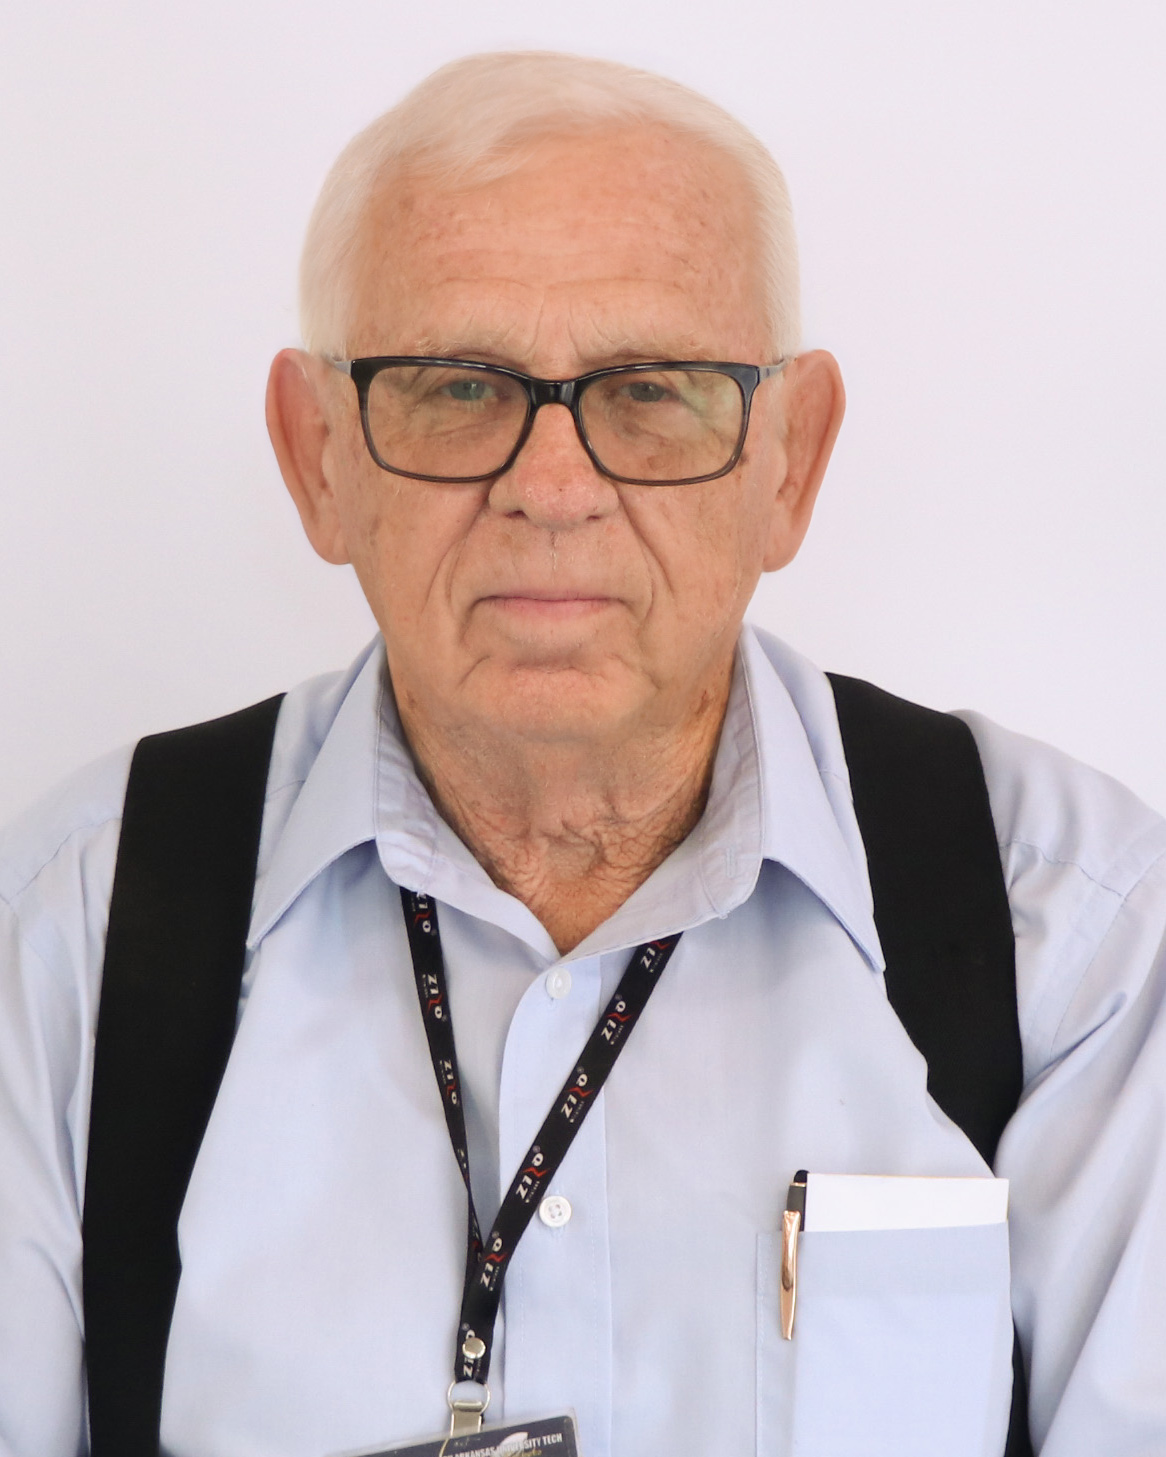 man with white hair wearing a blue shirt and glasses